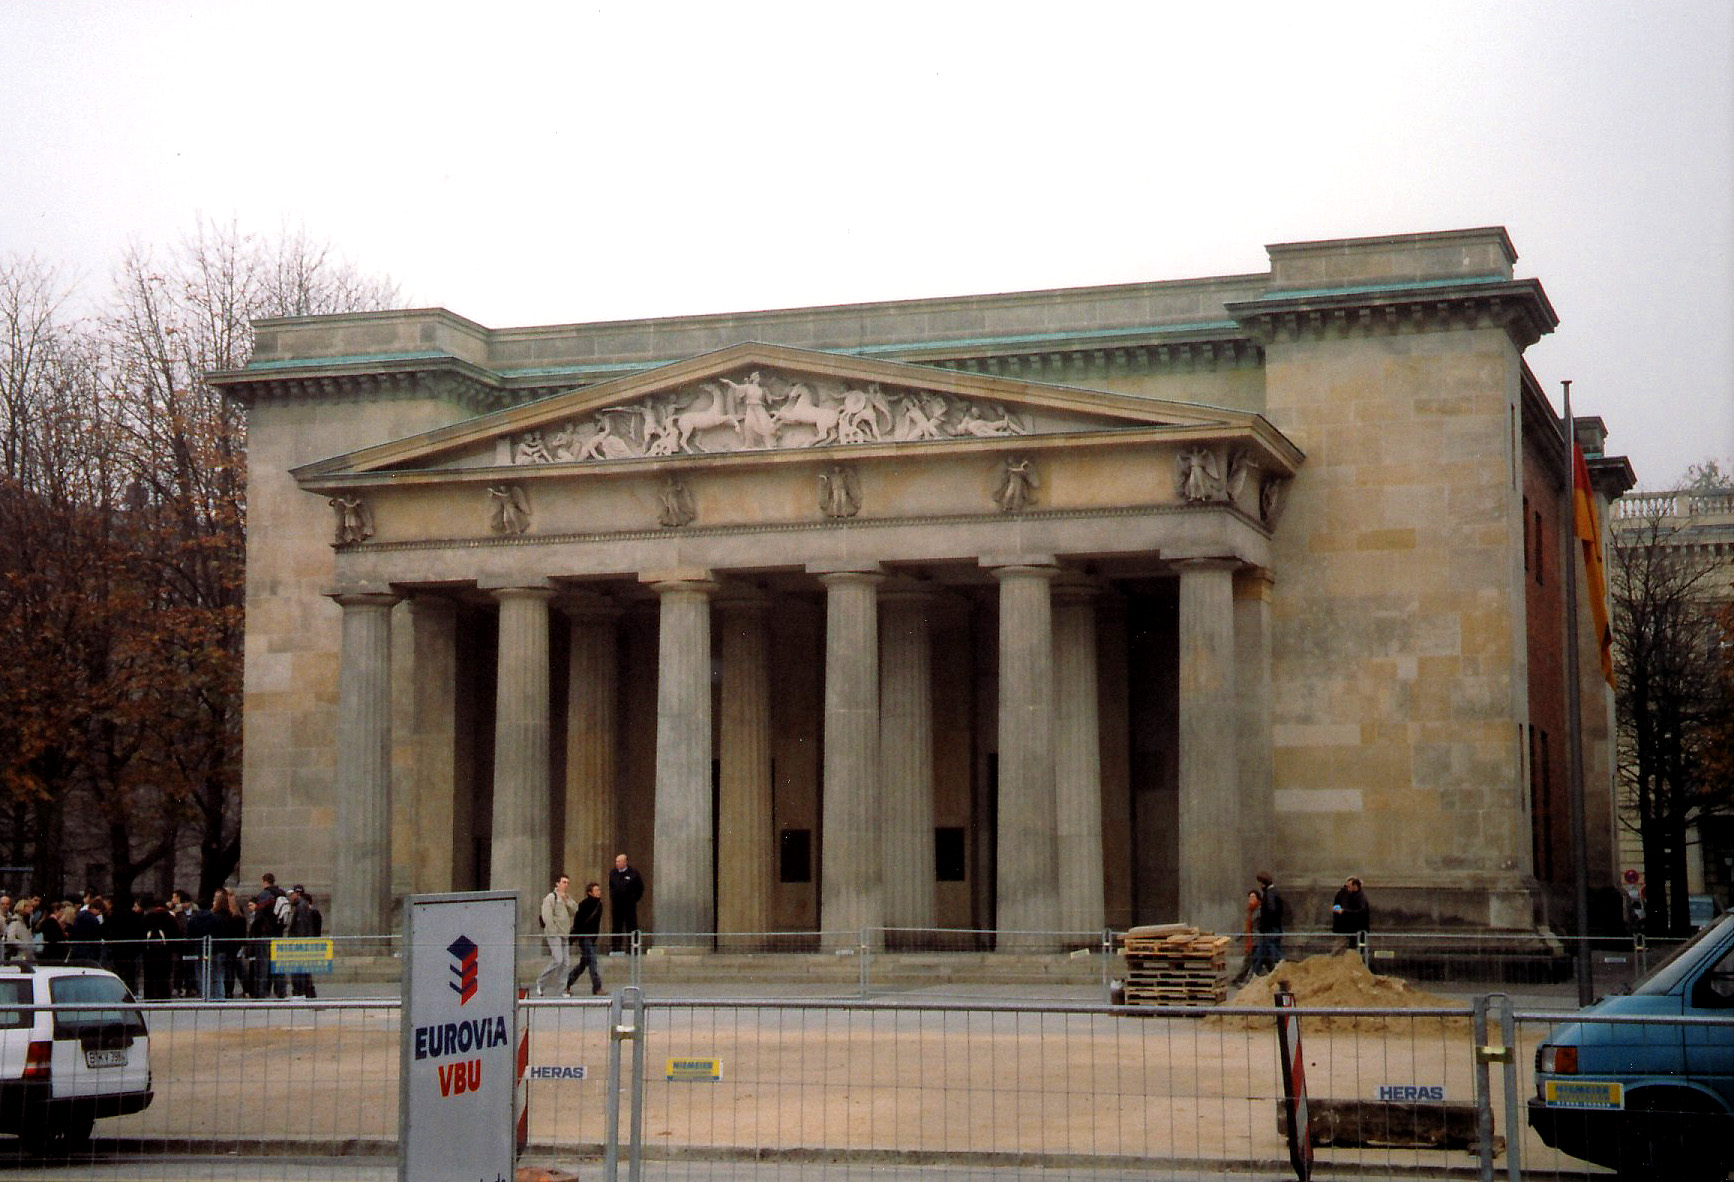 A classical-style building on Unter den Linden.